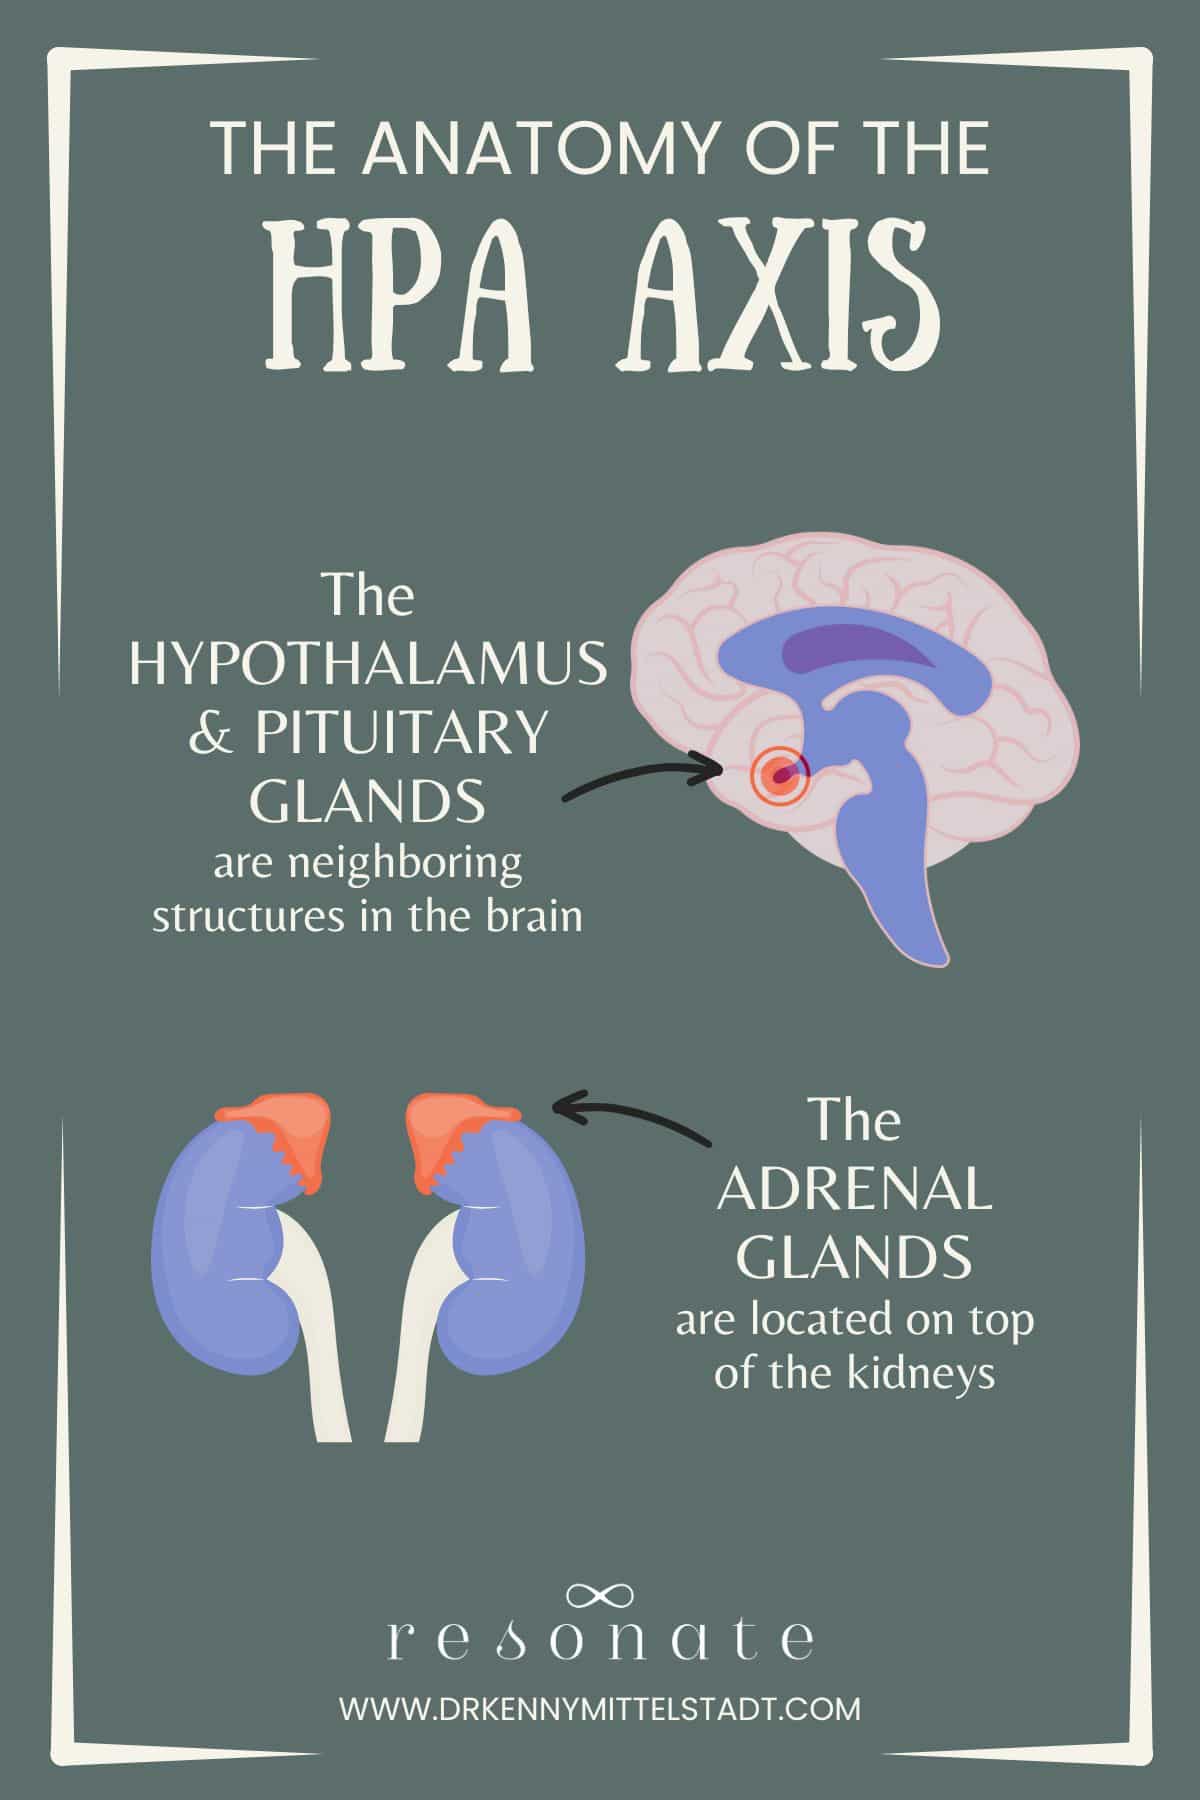 Graphic that shows where the glands of the HPA Axis are located. The hypothalamus and the pituitary gland are neighboring structures in the brain and the adrenal gland are on top of the kidneys.